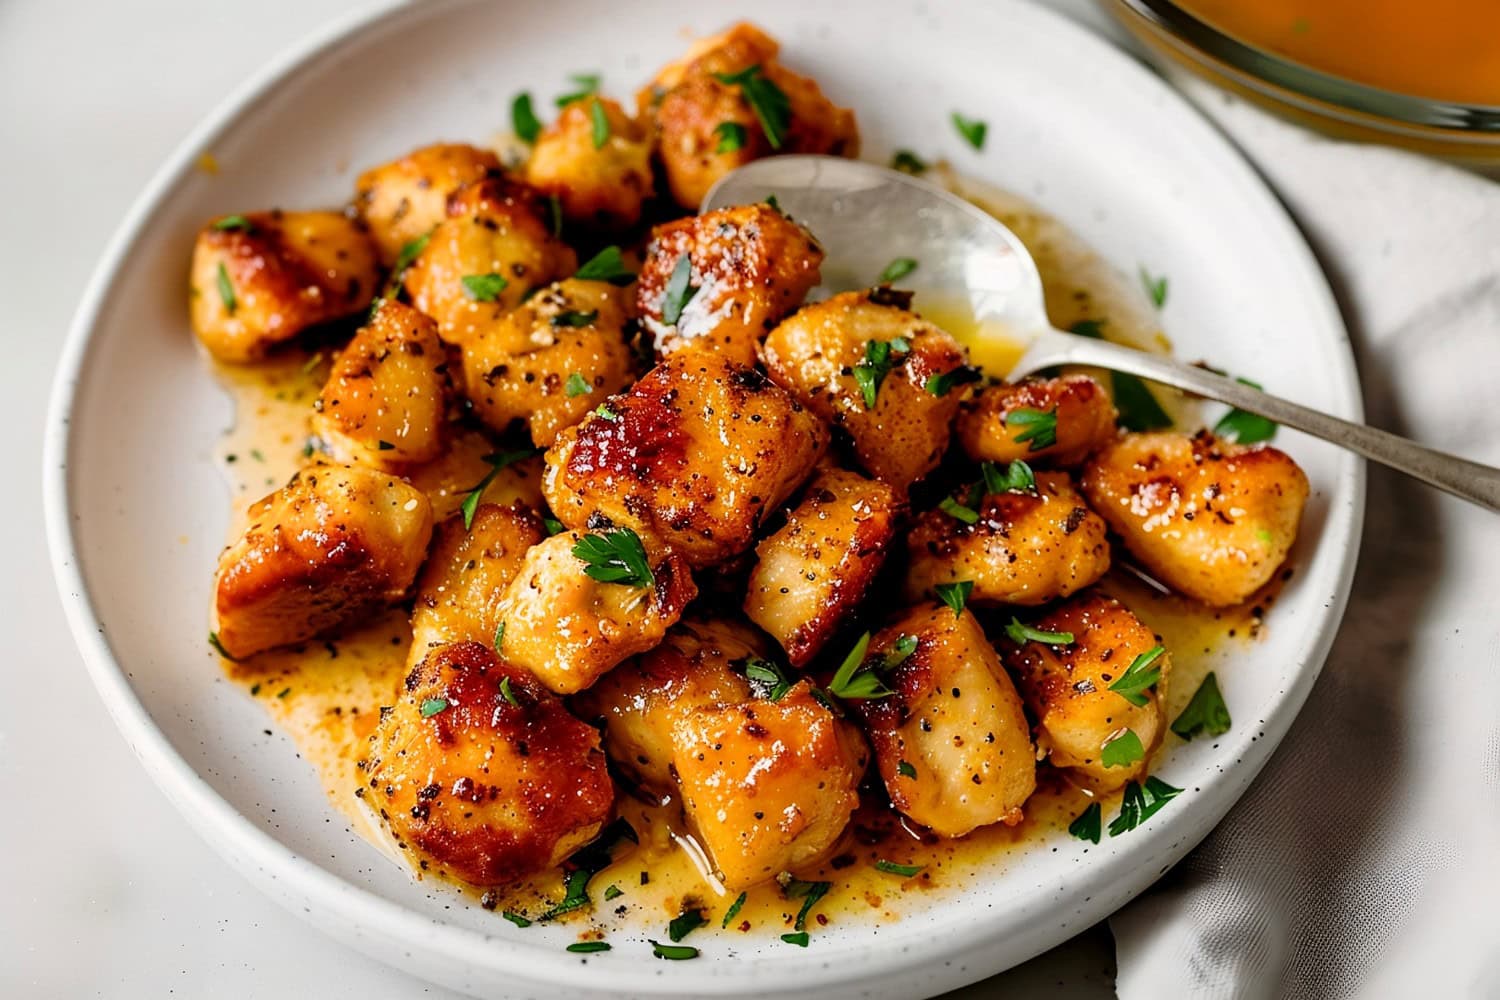 Bite-sized pieces of chicken breasts coated in a buttery garlic glaze